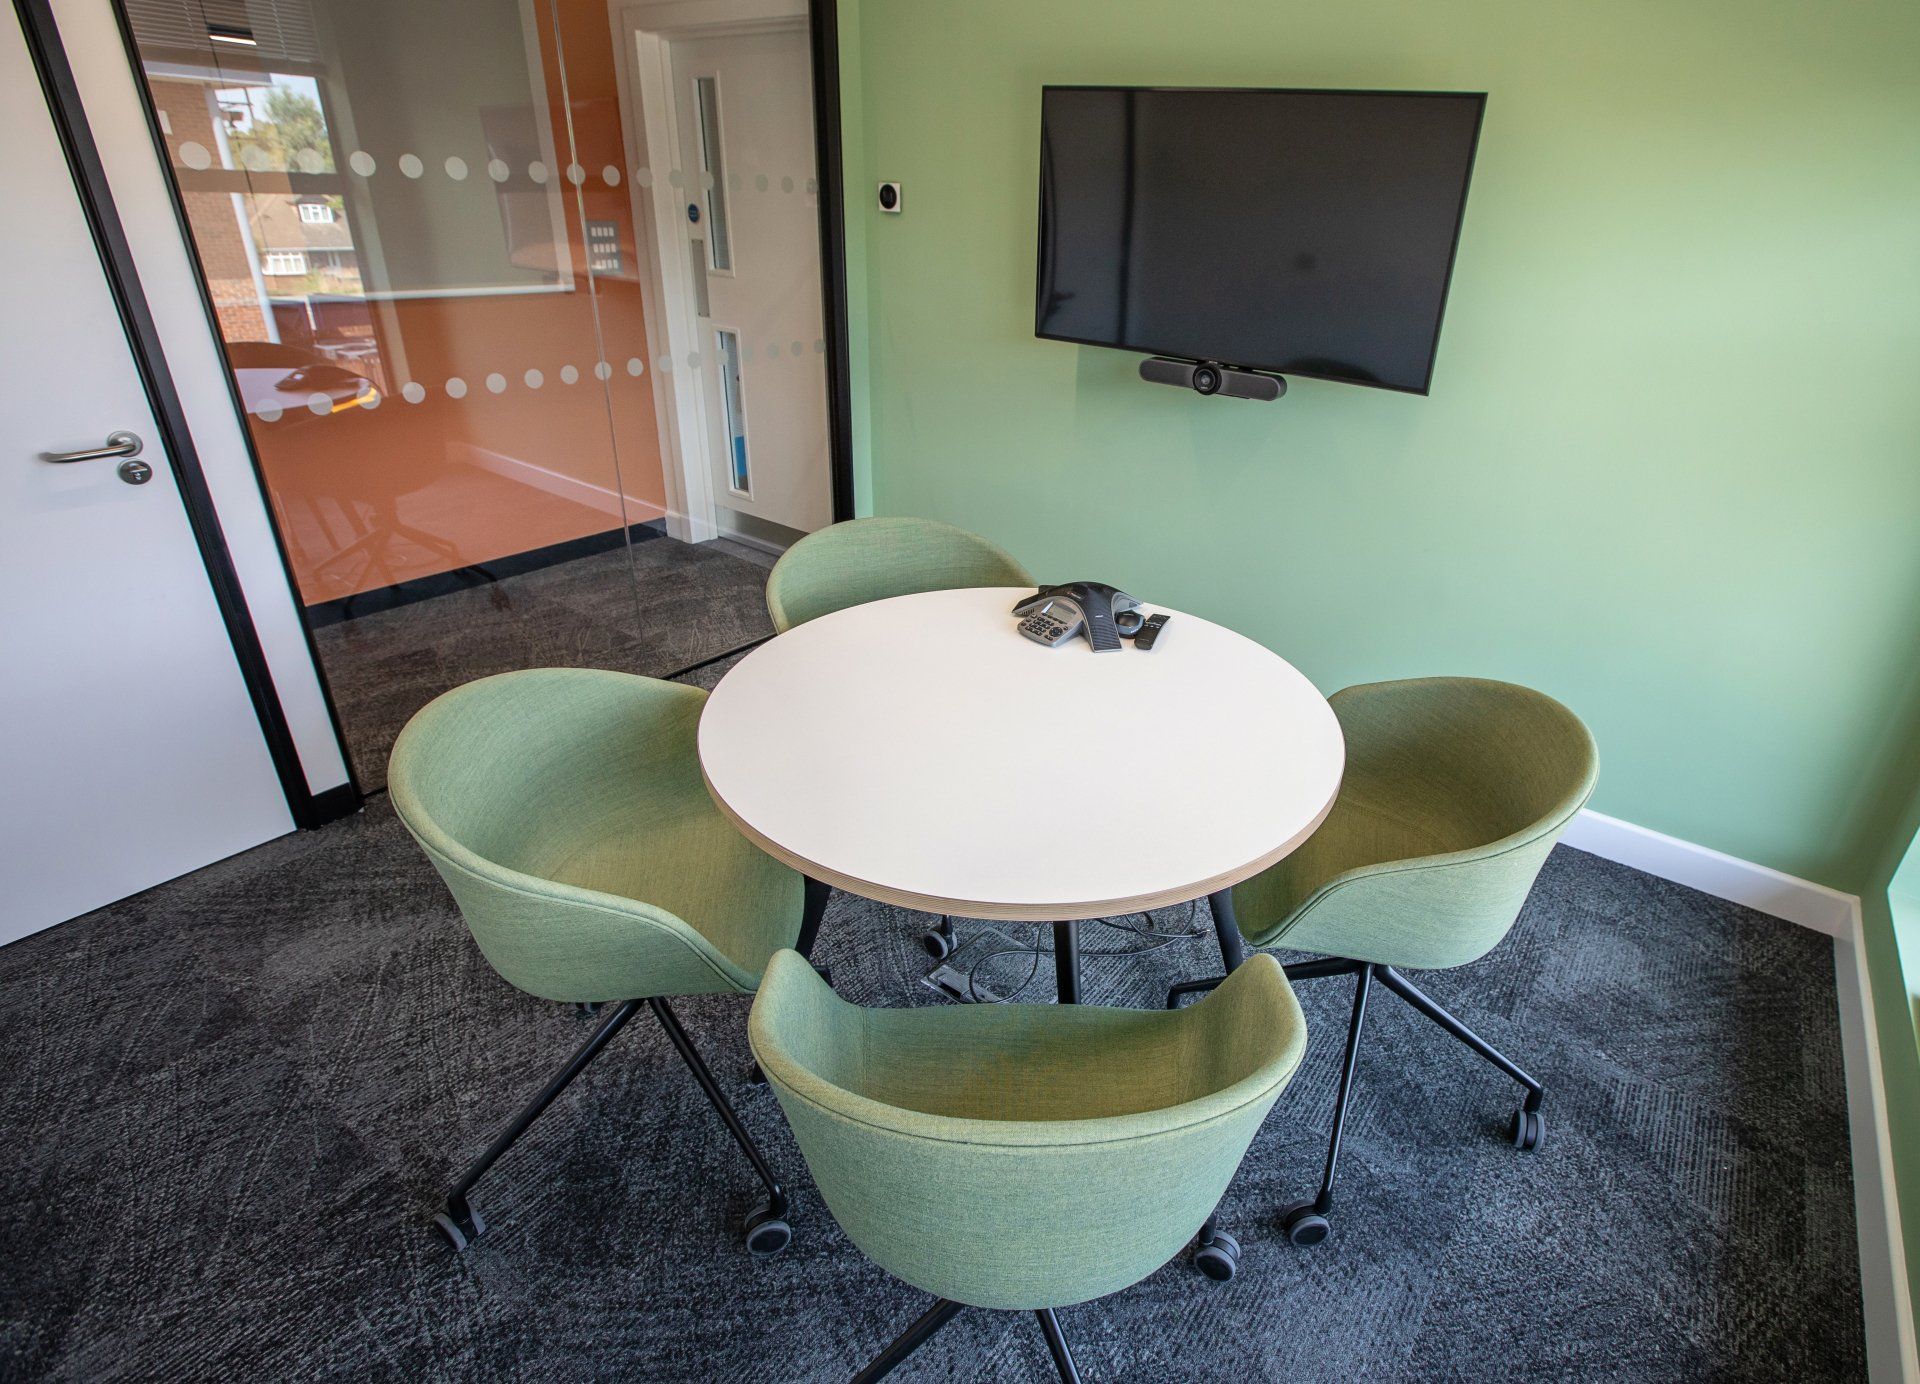 A conference room with a round table and chairs and a flat screen tv.